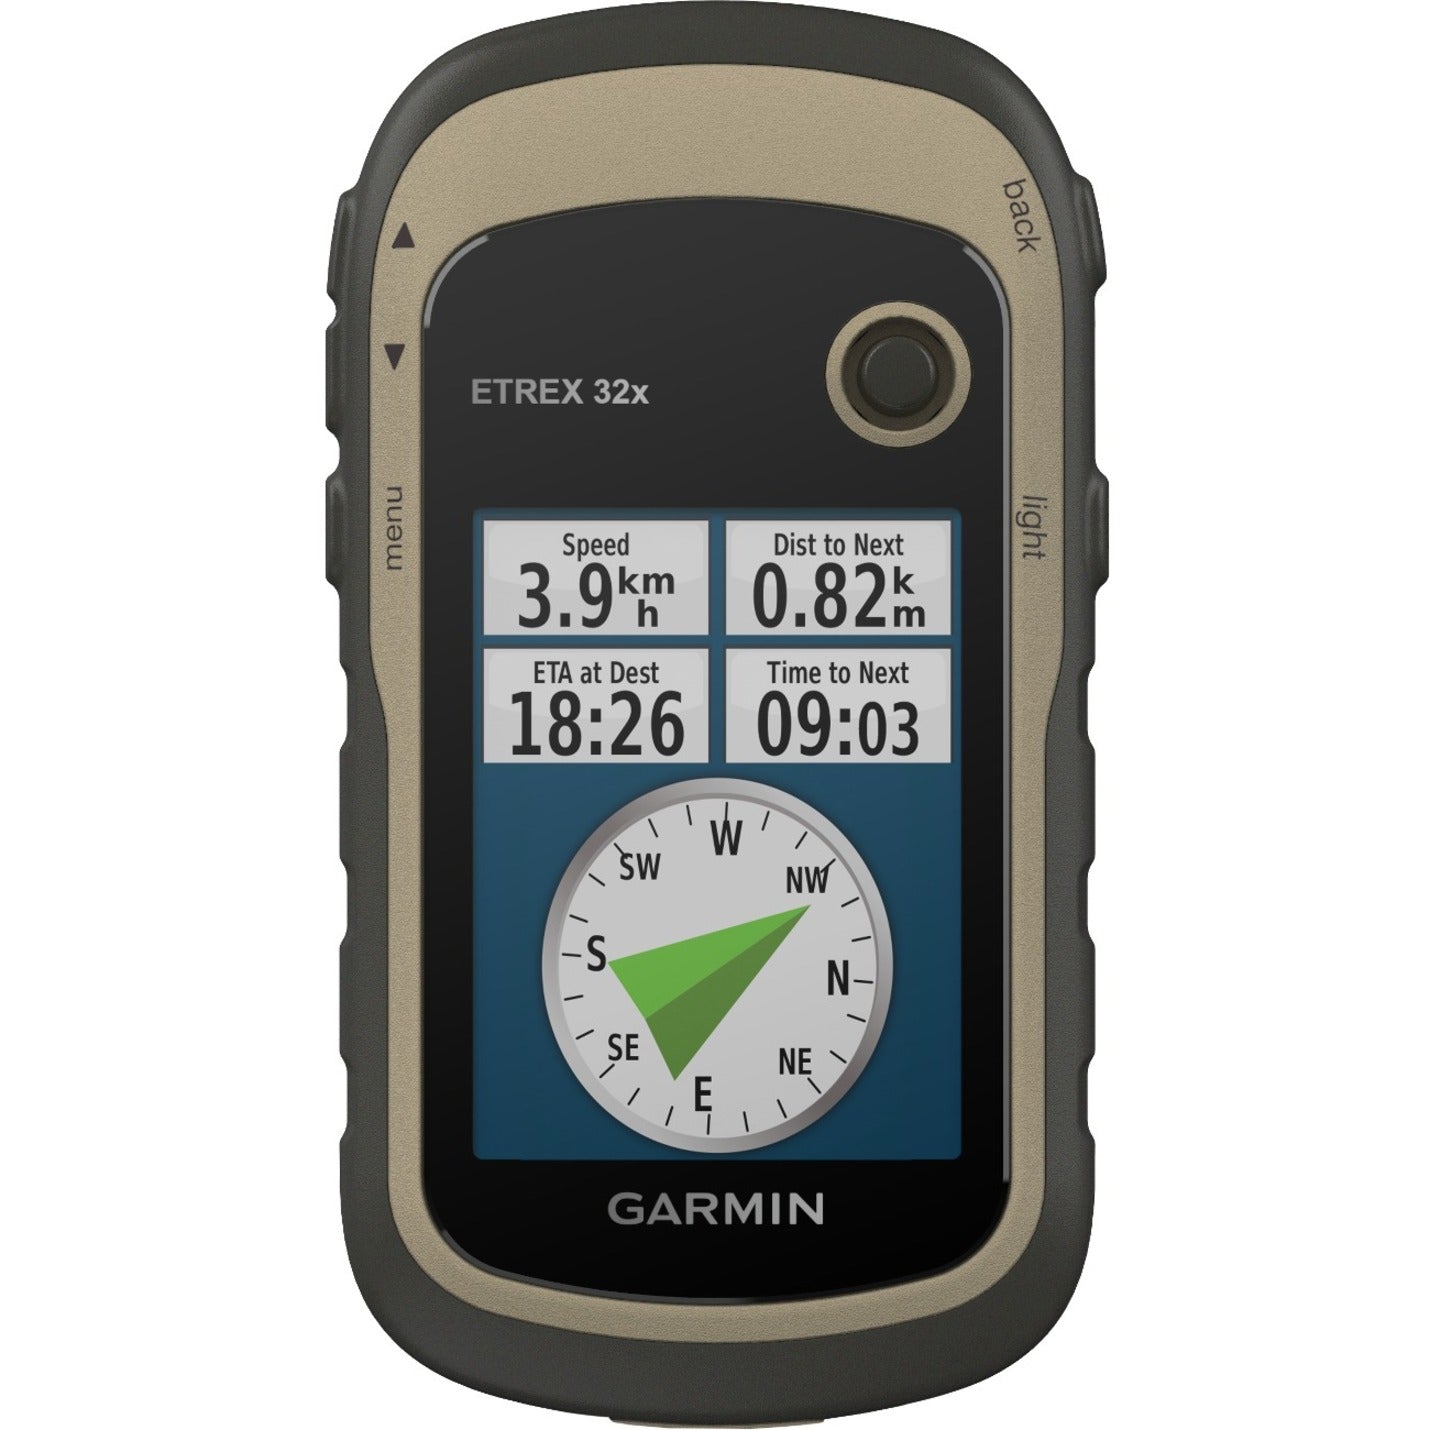 Garmin 010-02257-00 eTrex 32x Rugged Handheld GPS with Compass and Barometric Altimeter, 2.2" Color Display, Preloaded Maps